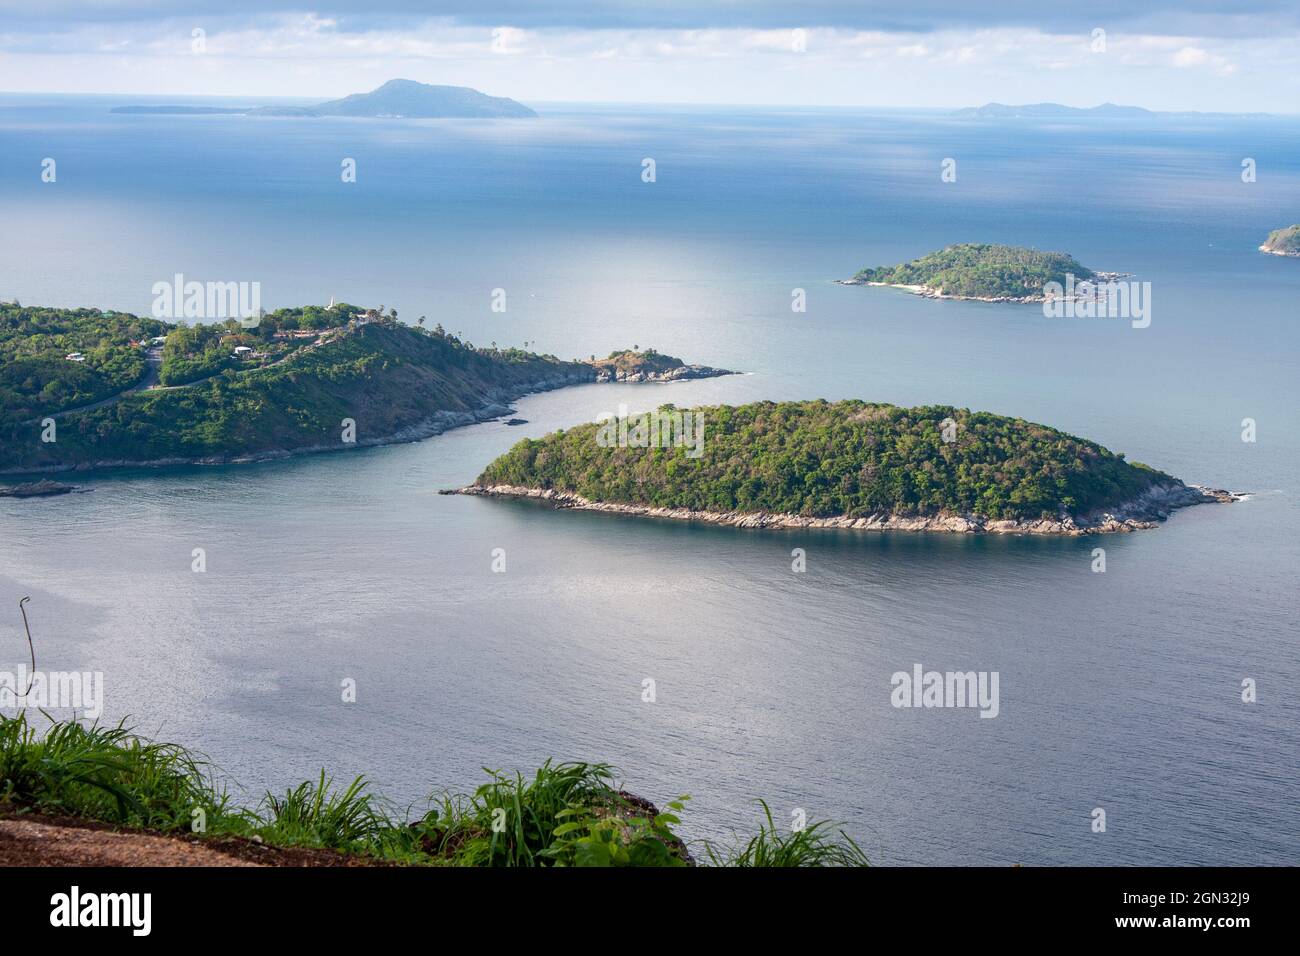 View of the green covered islets and sea from the Black Rock viewpoint in Phuket, Thailand Stock Photo